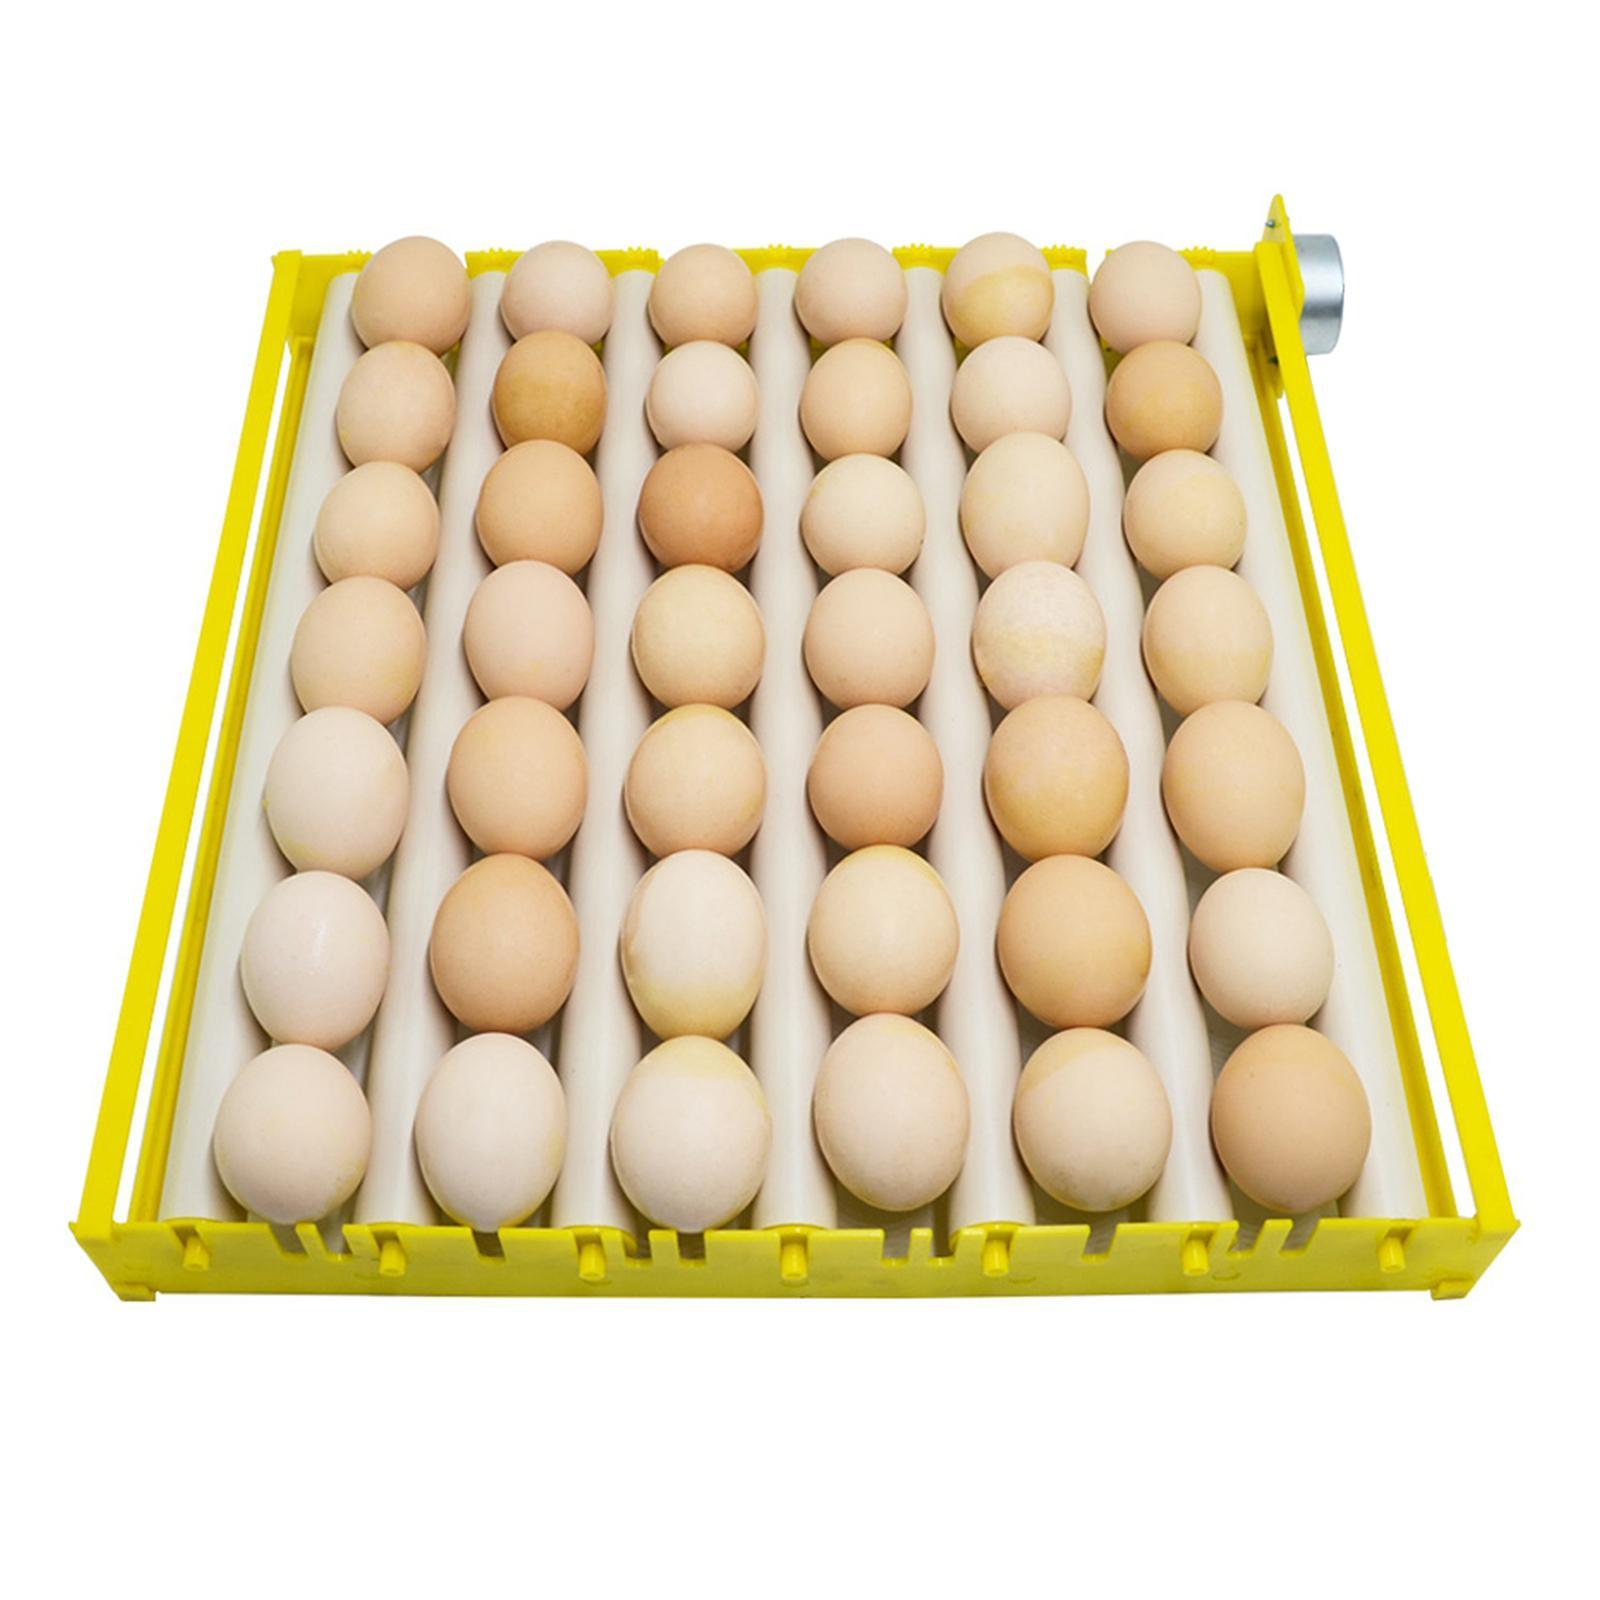 Egg Incubator Tray Automatic Egg Roller Household Duck